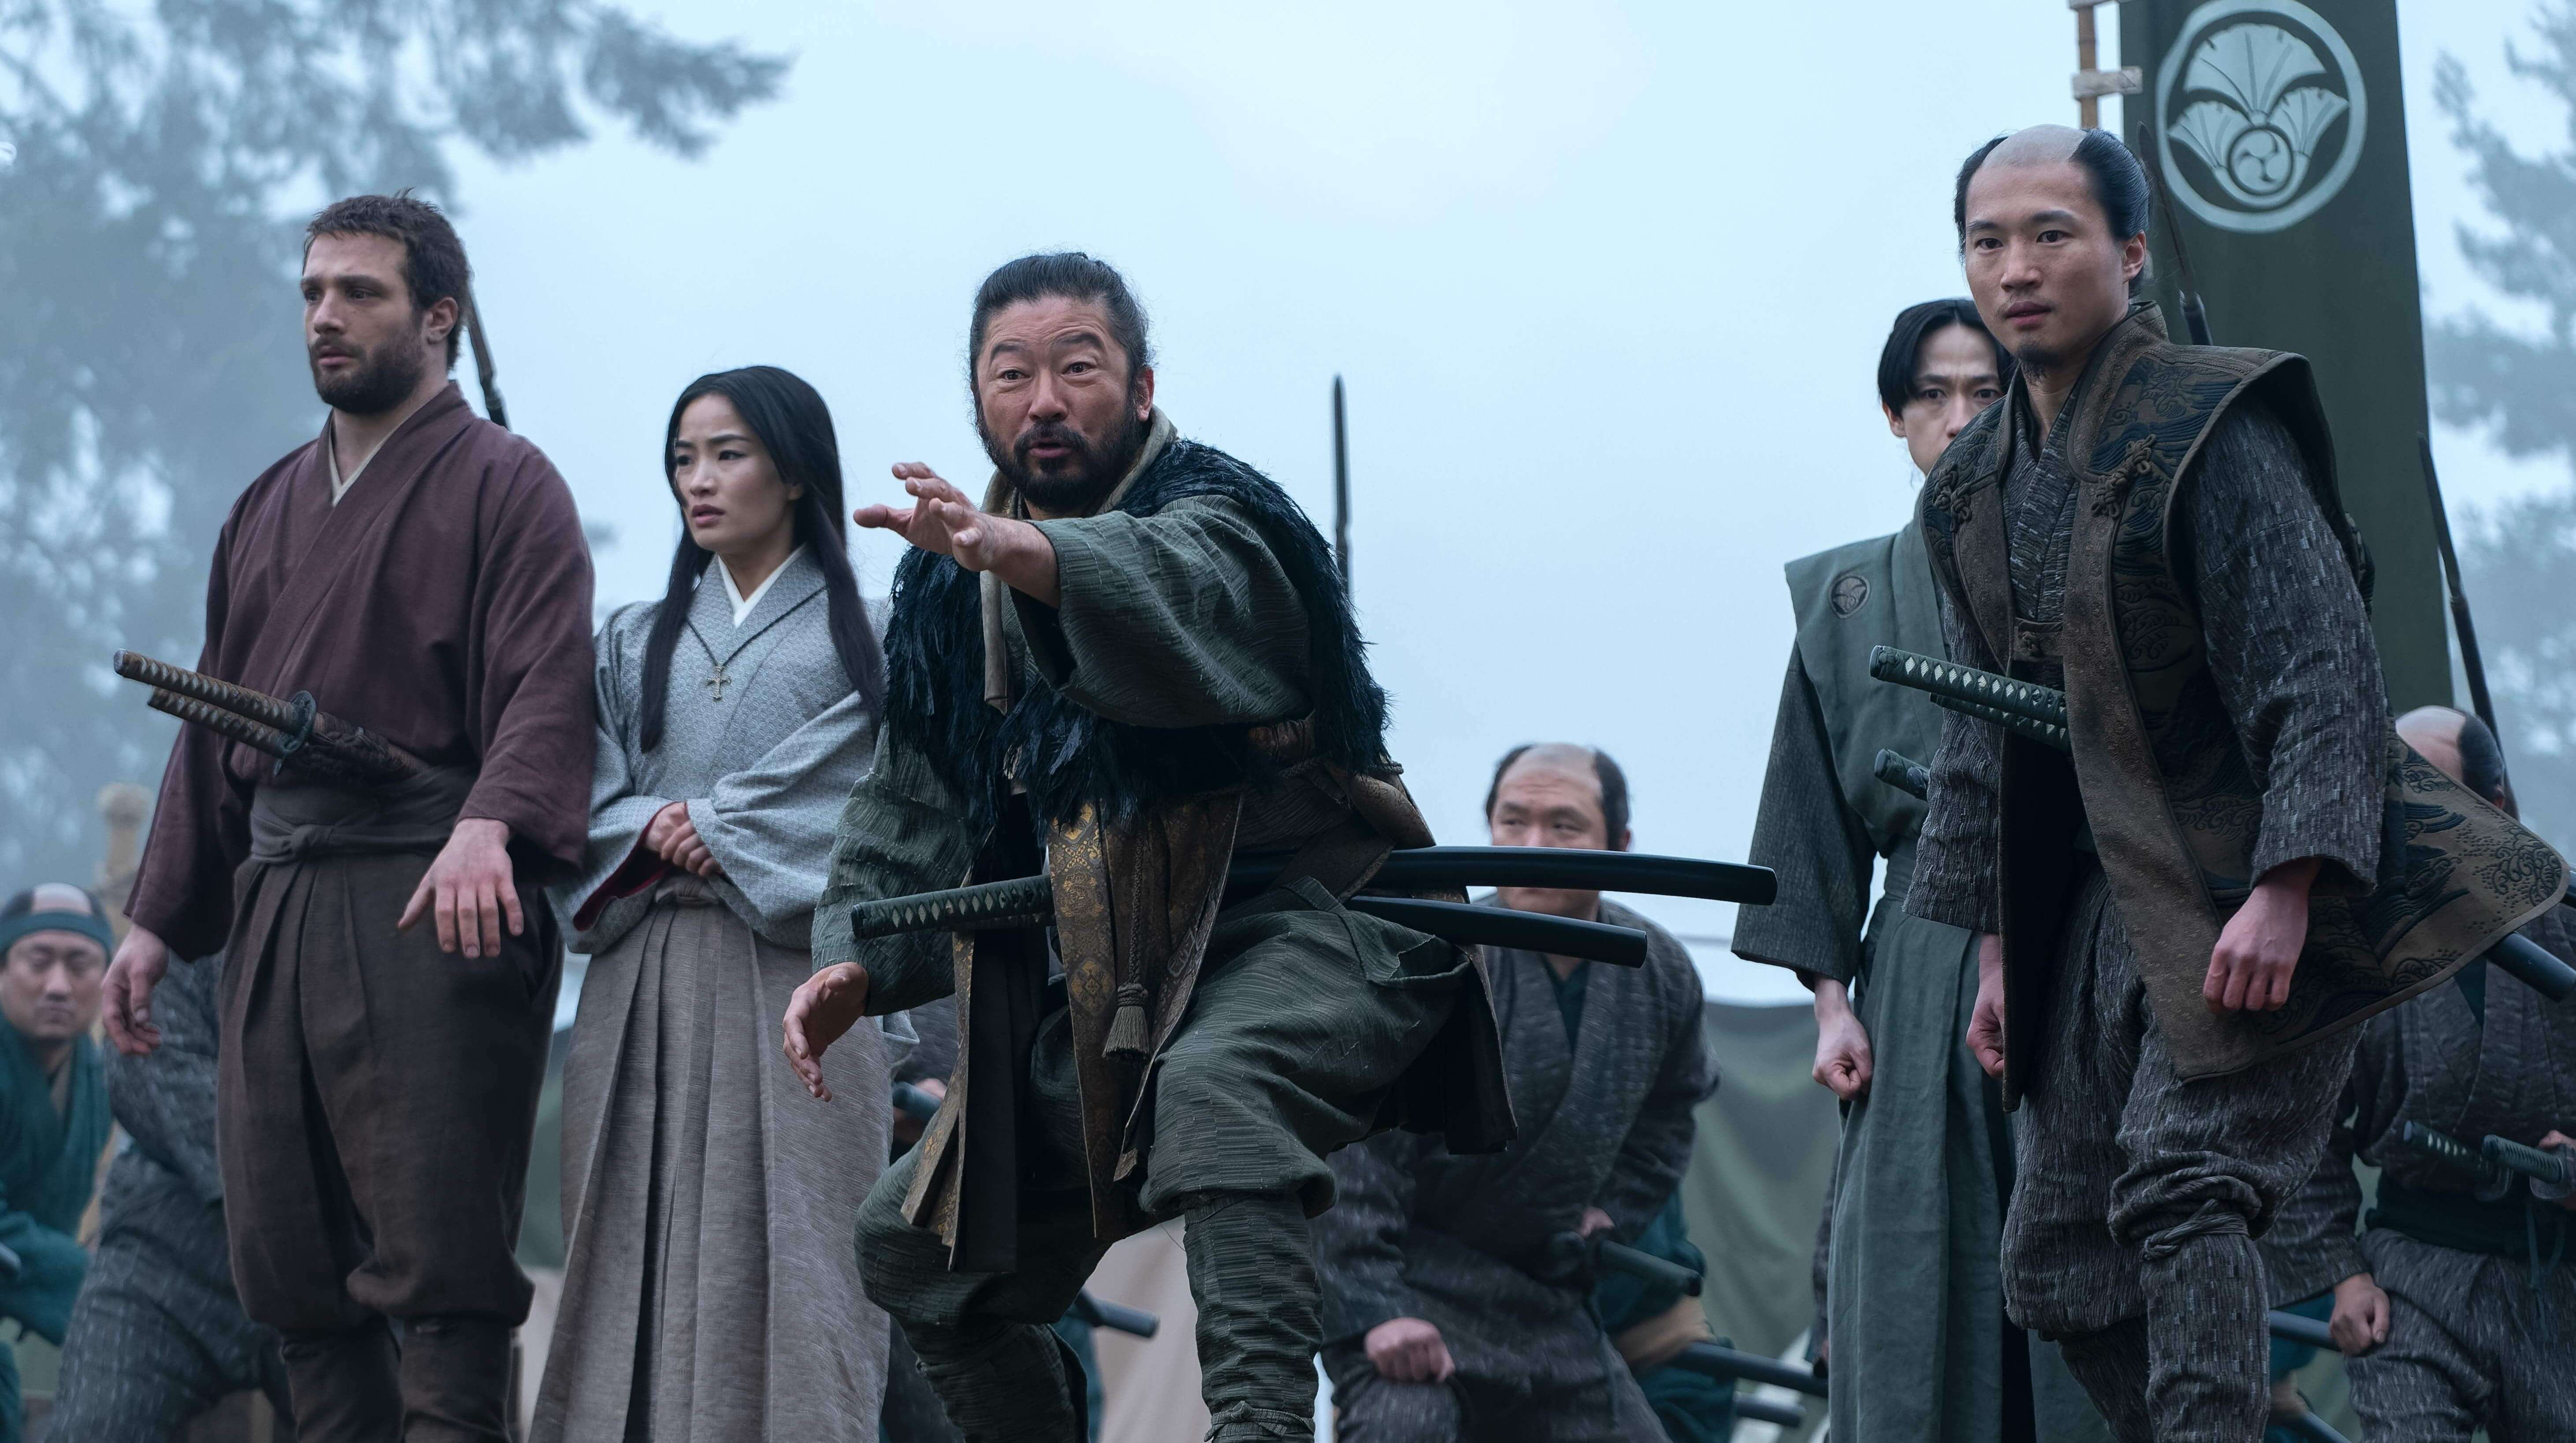 Shōgun recap: The show tries out some new tricks in “The Eightfold Fence”